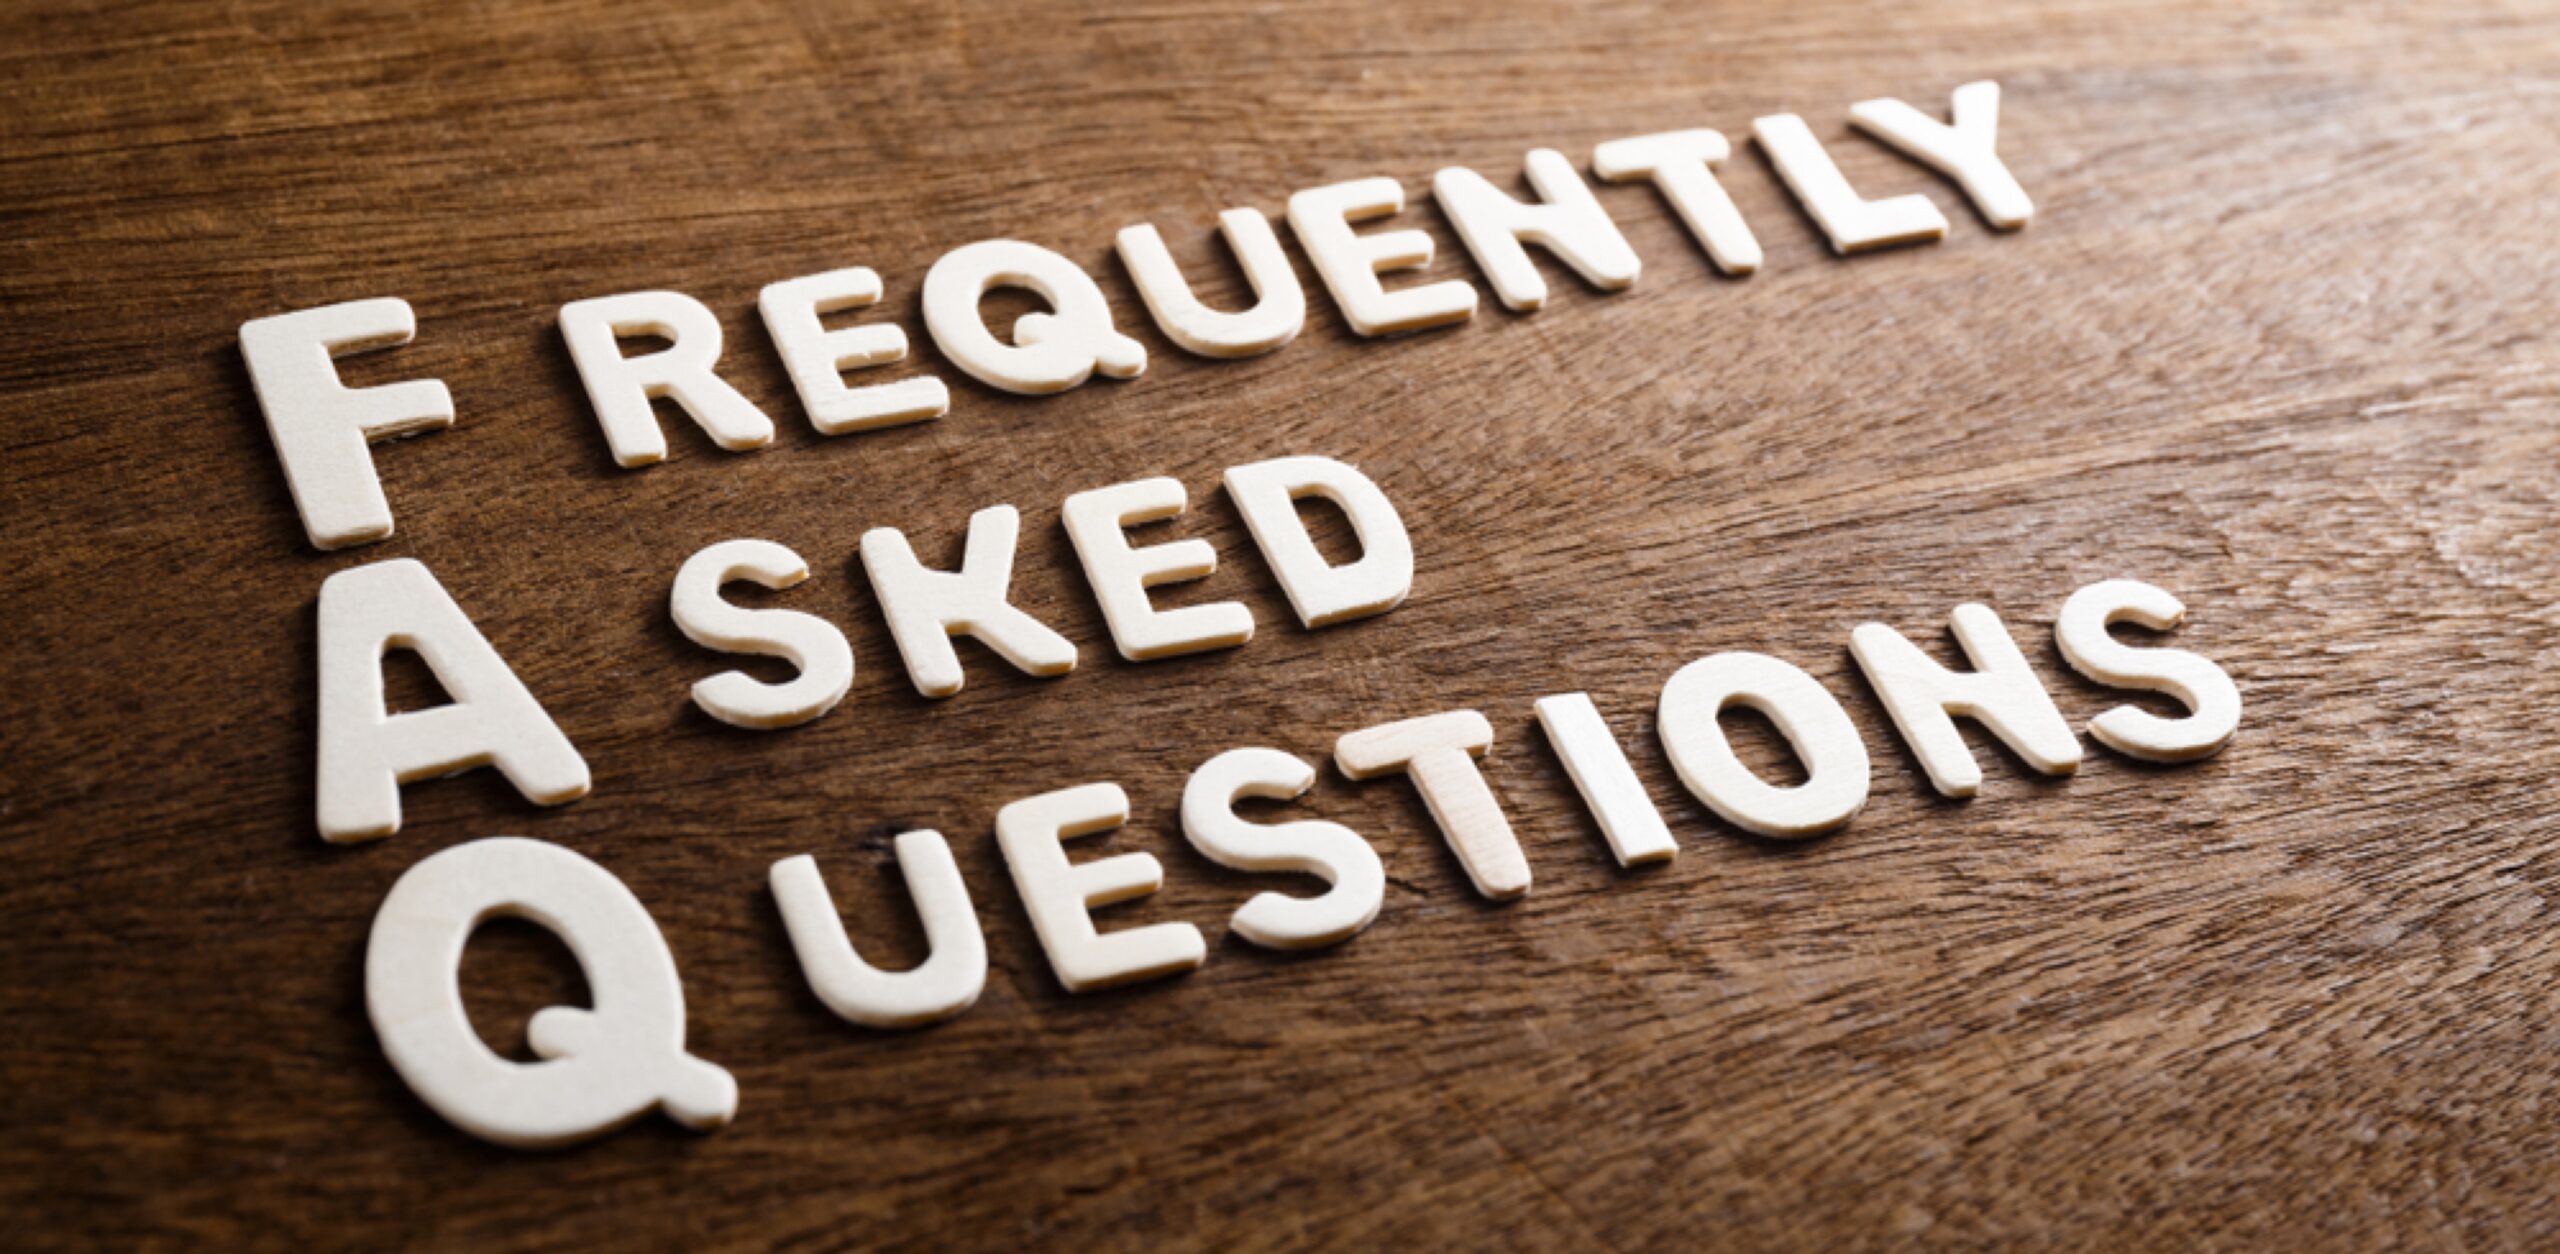 interlock frequently asked questions